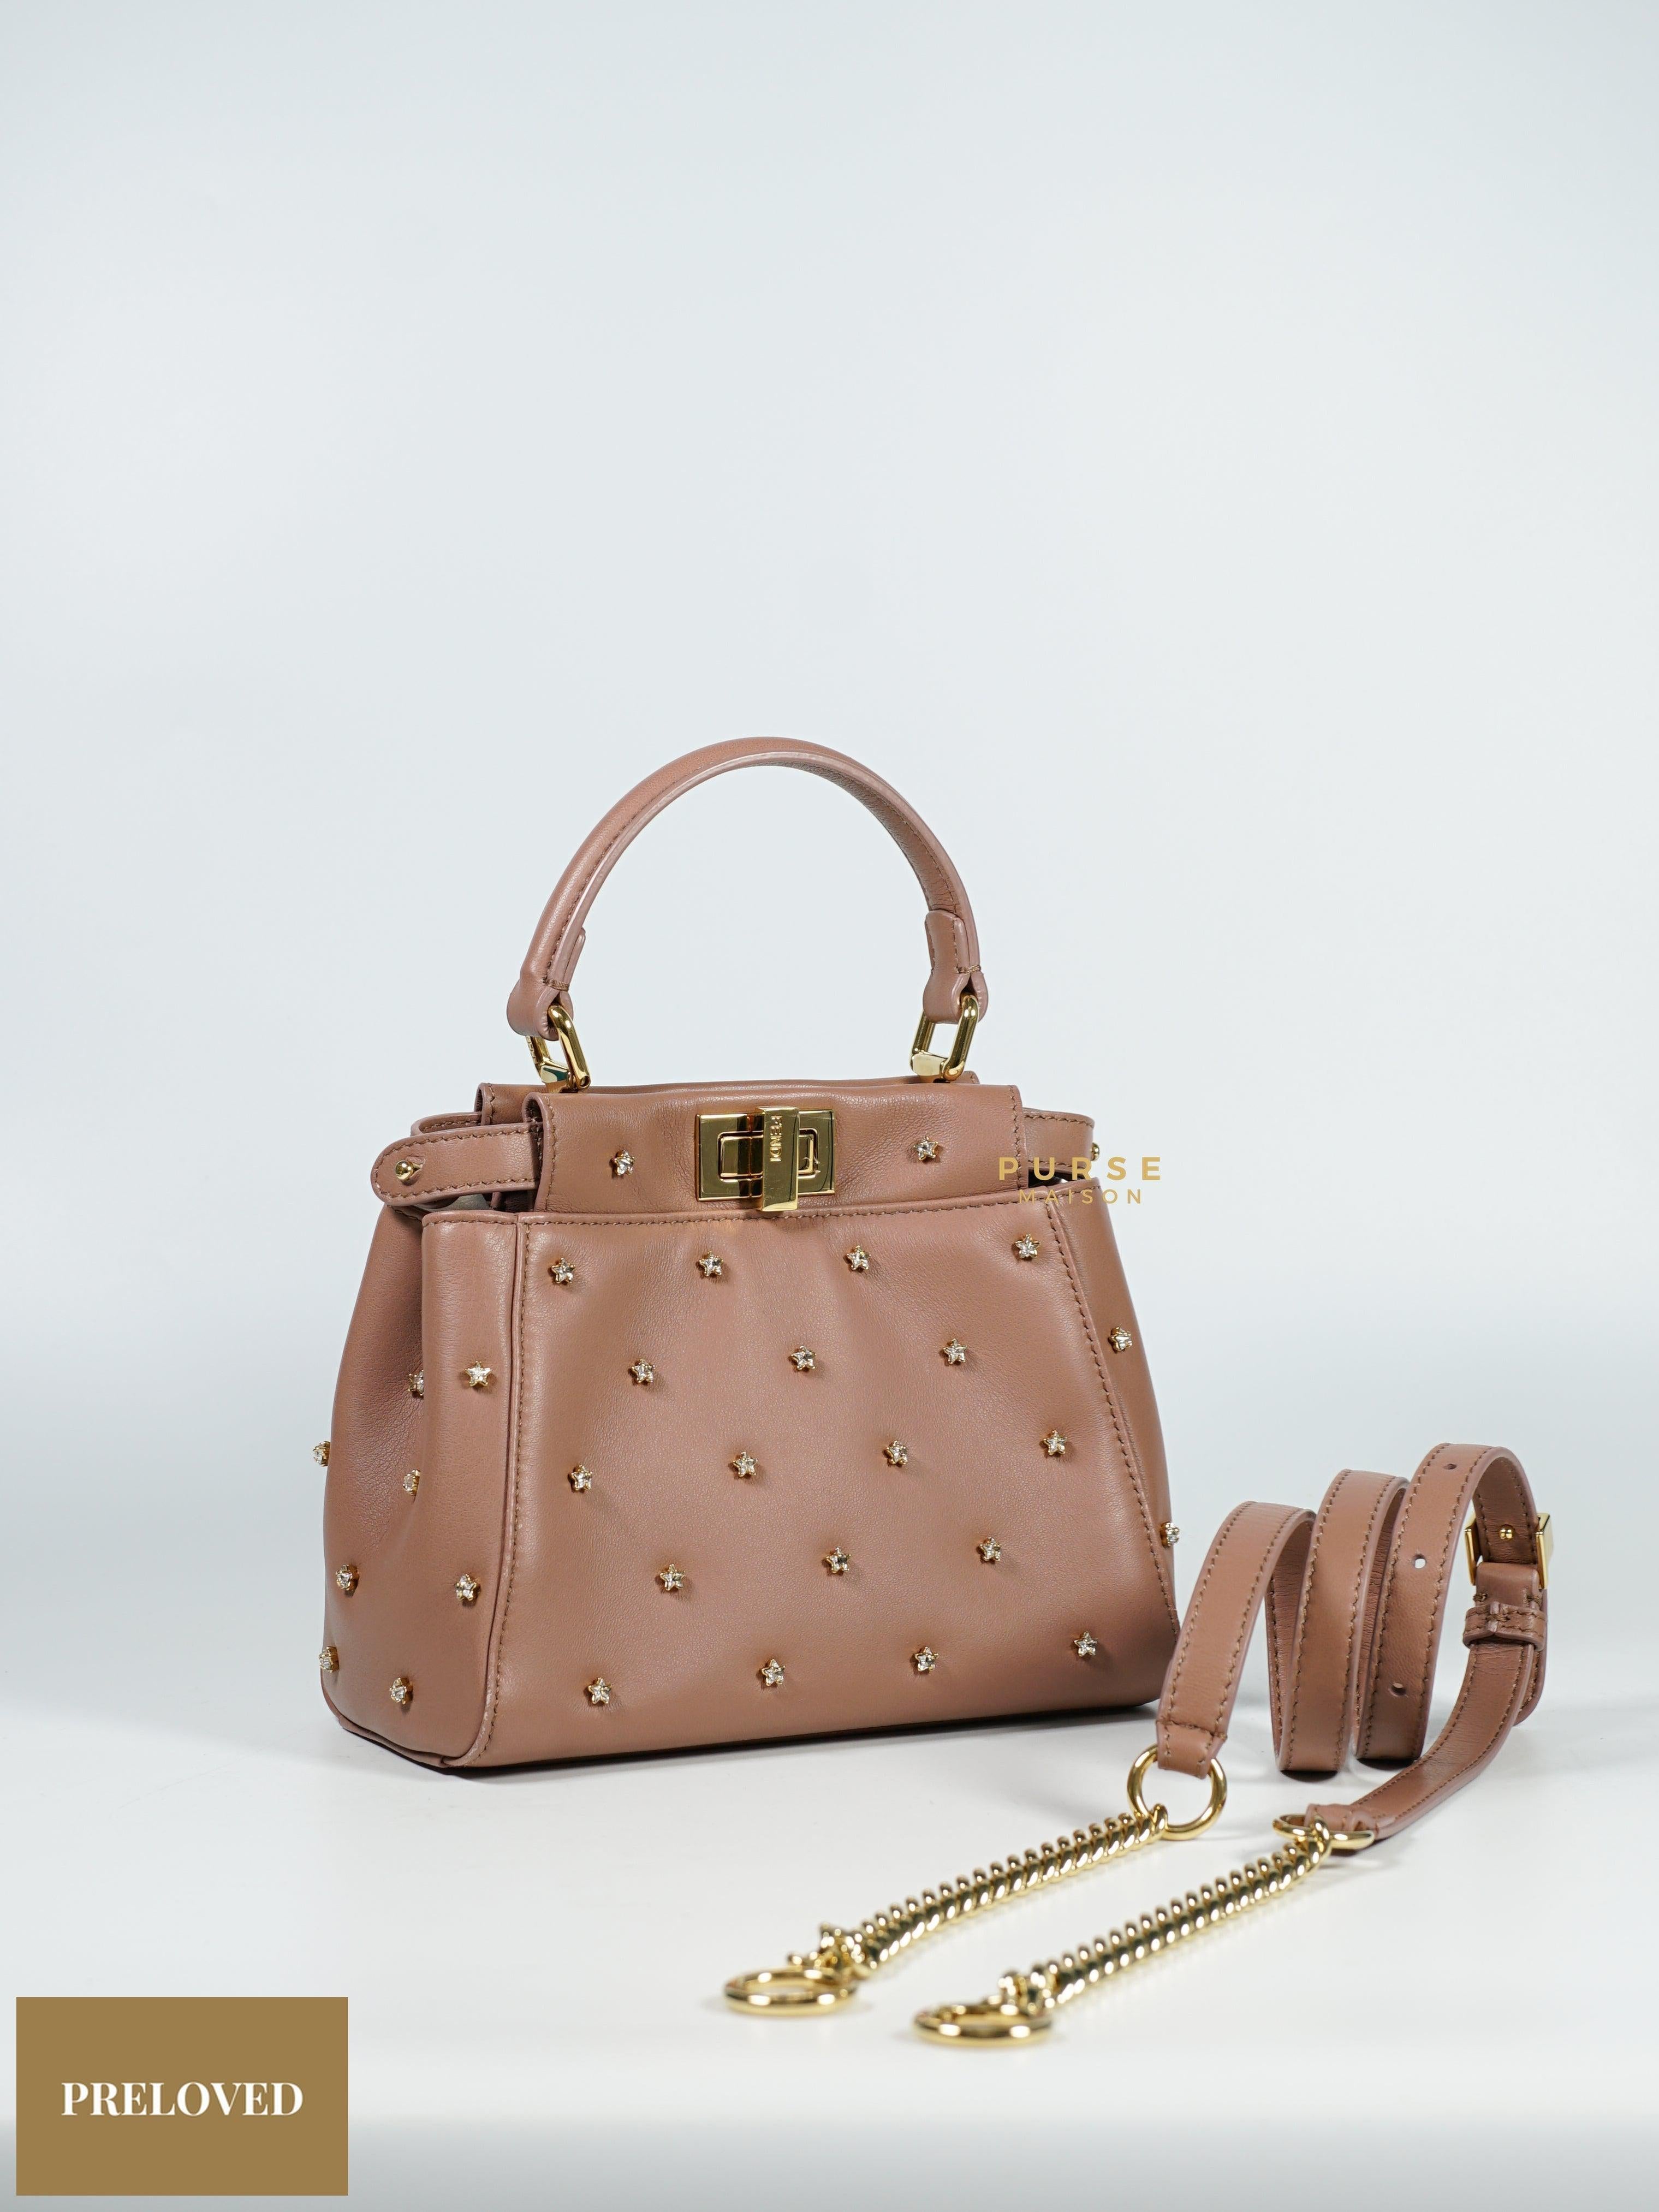 Fendi XS Peekaboo with Crystal Studded Rose Pink Bag (limited edition)